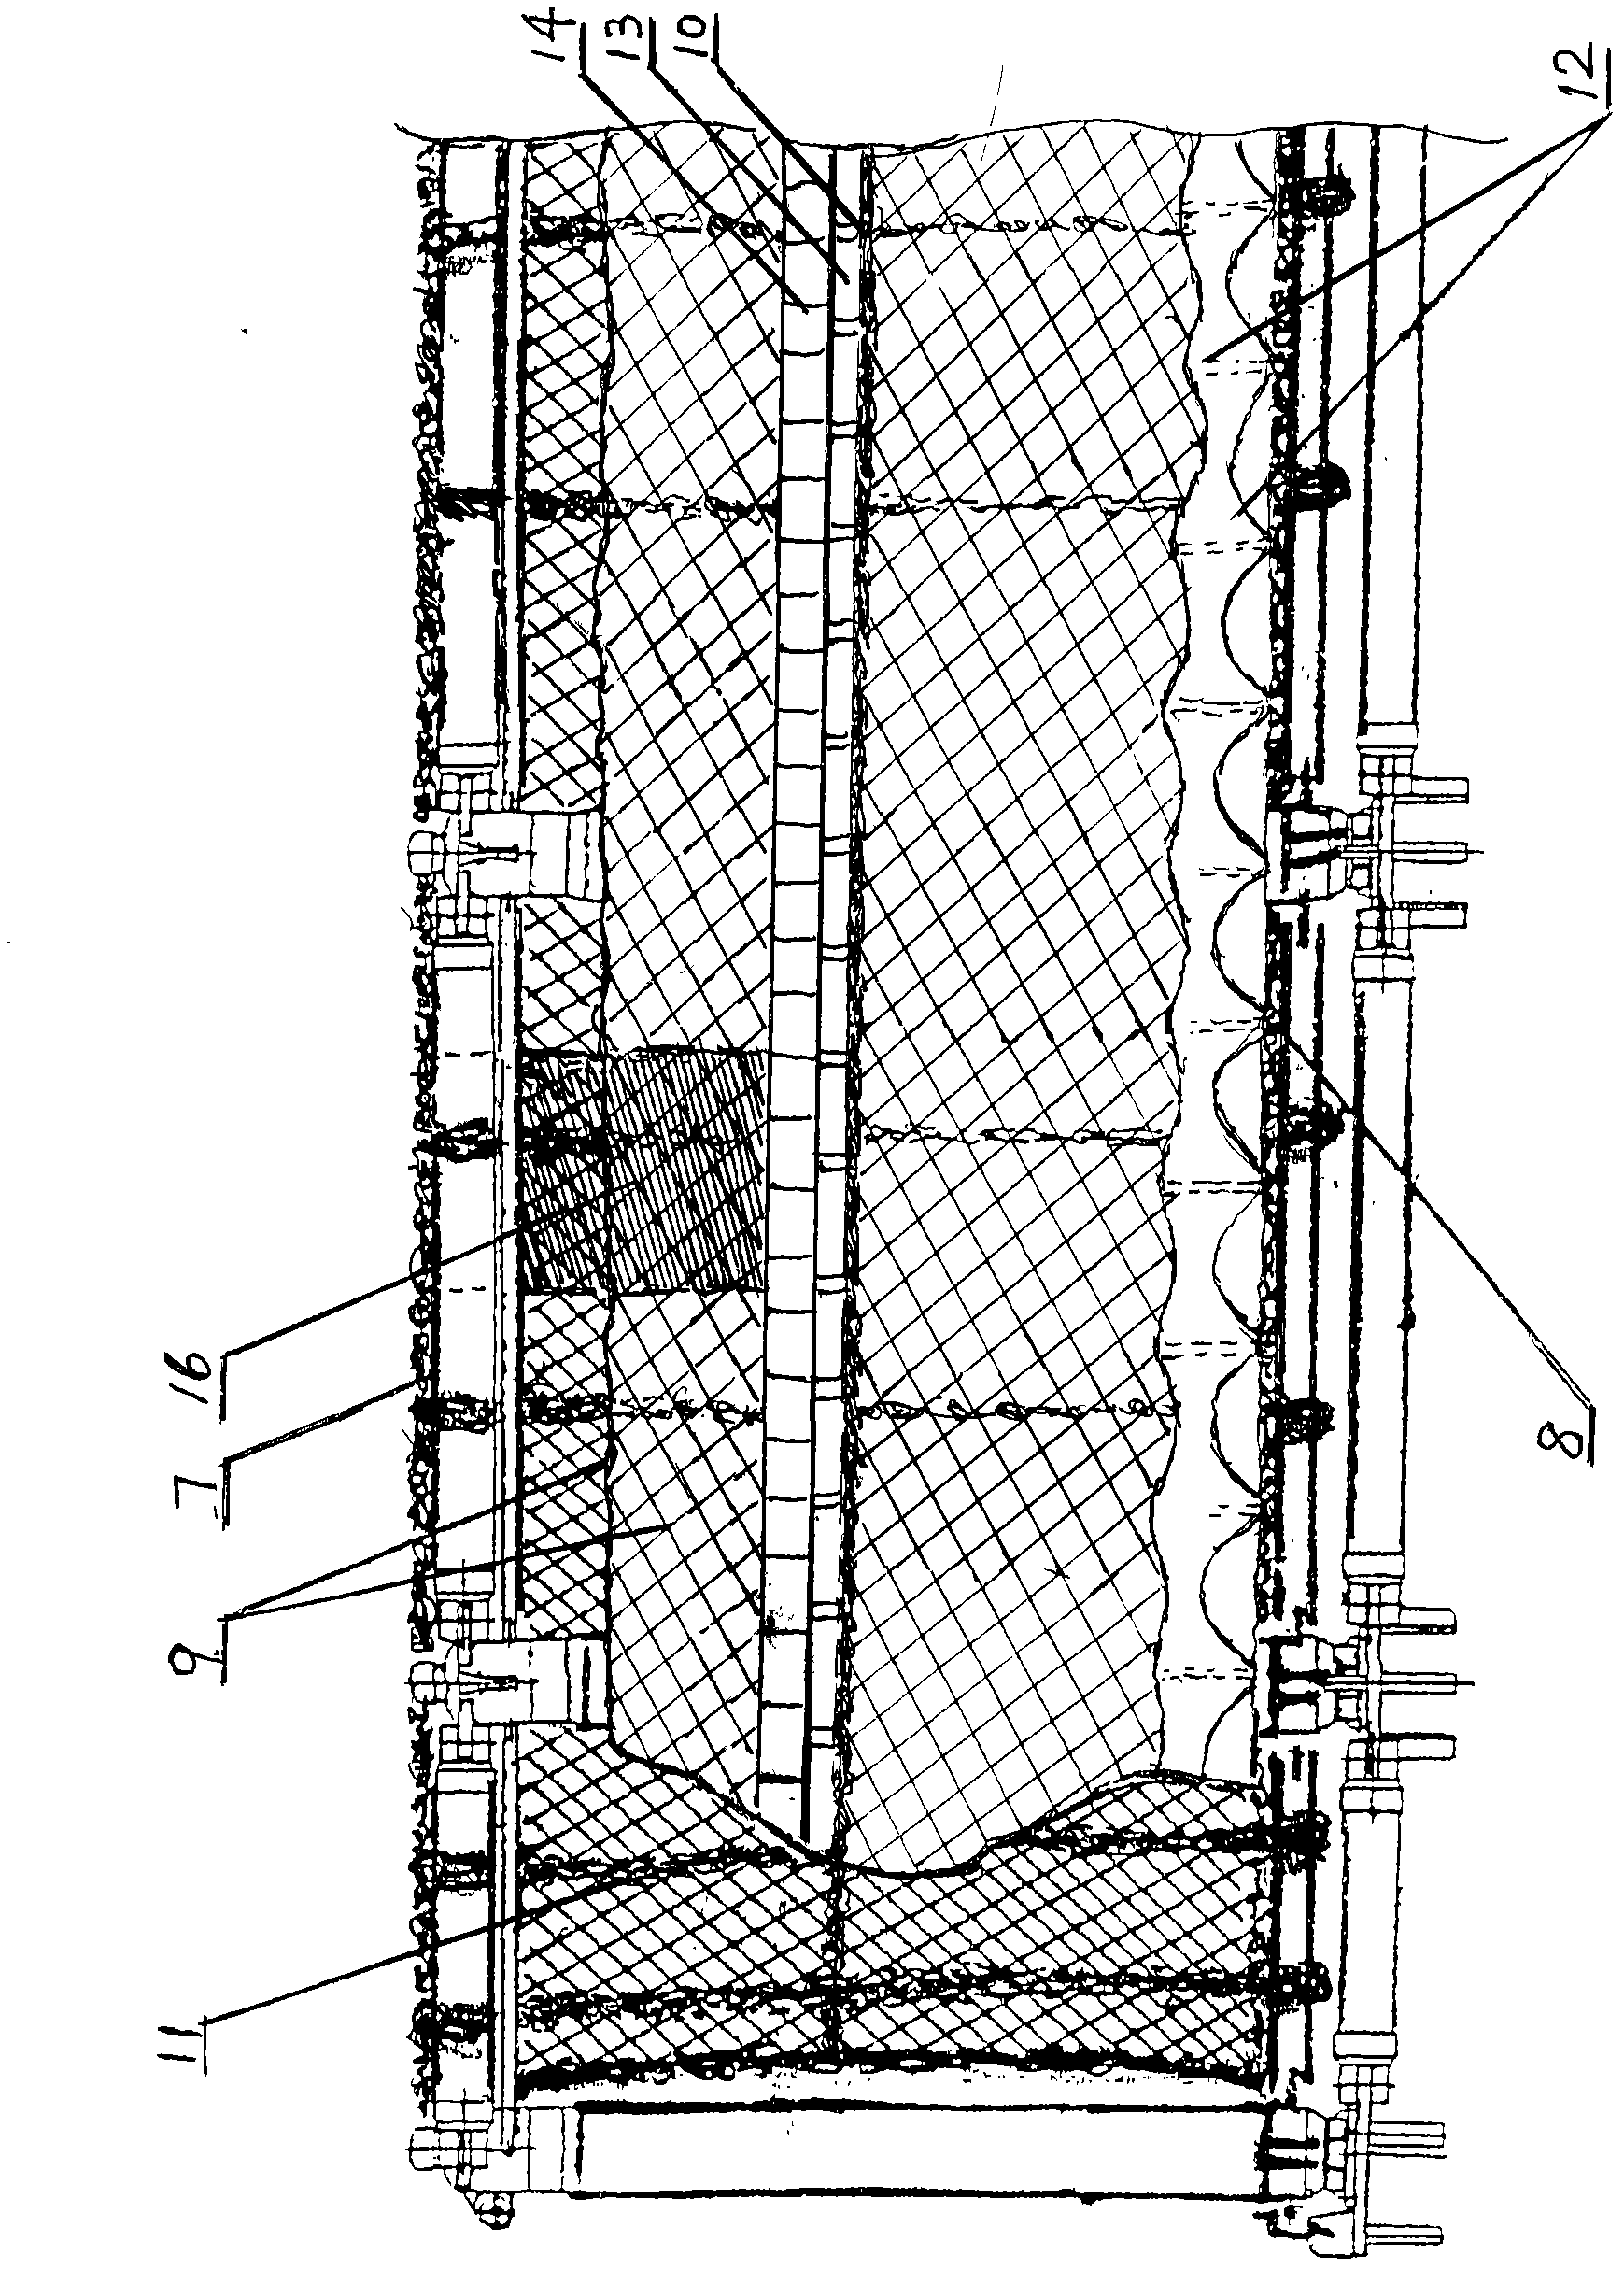 Ecological breeding net cage for cocultivation of sea cucumbers and sea urchins